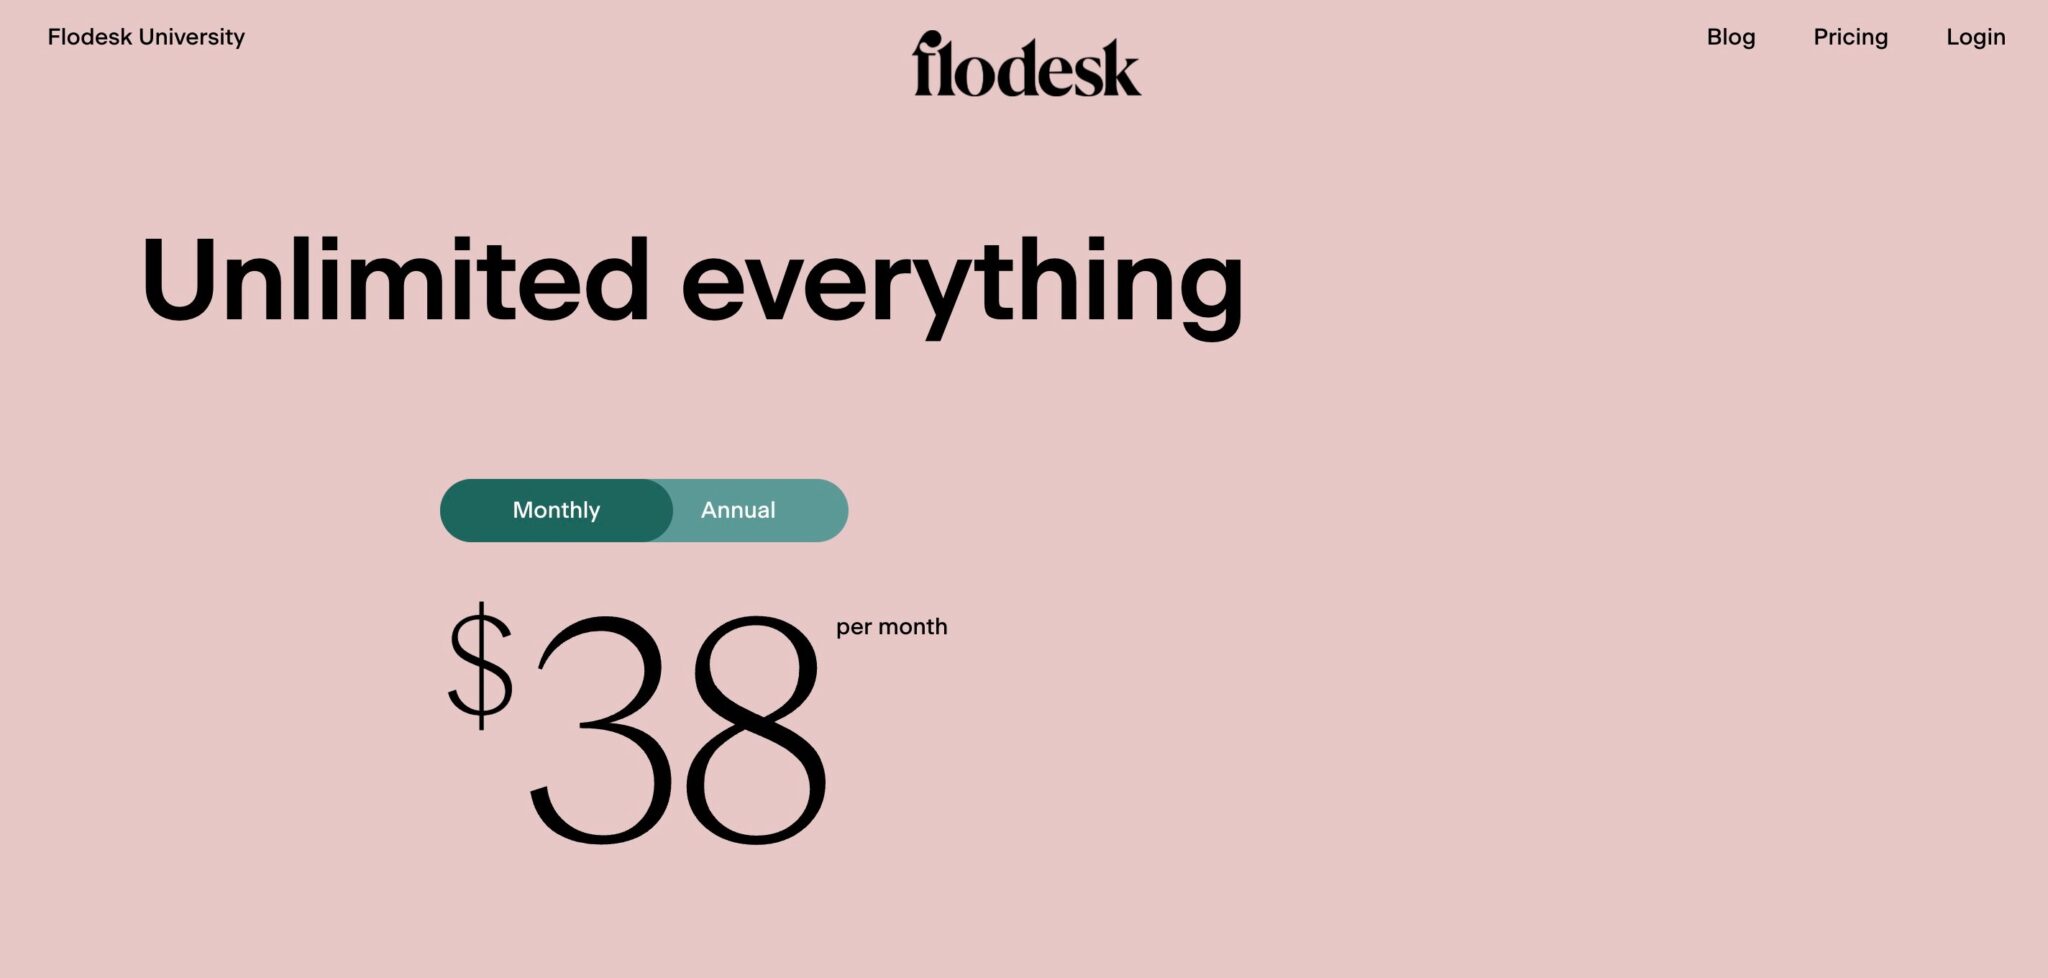 Flodesk pricing structure